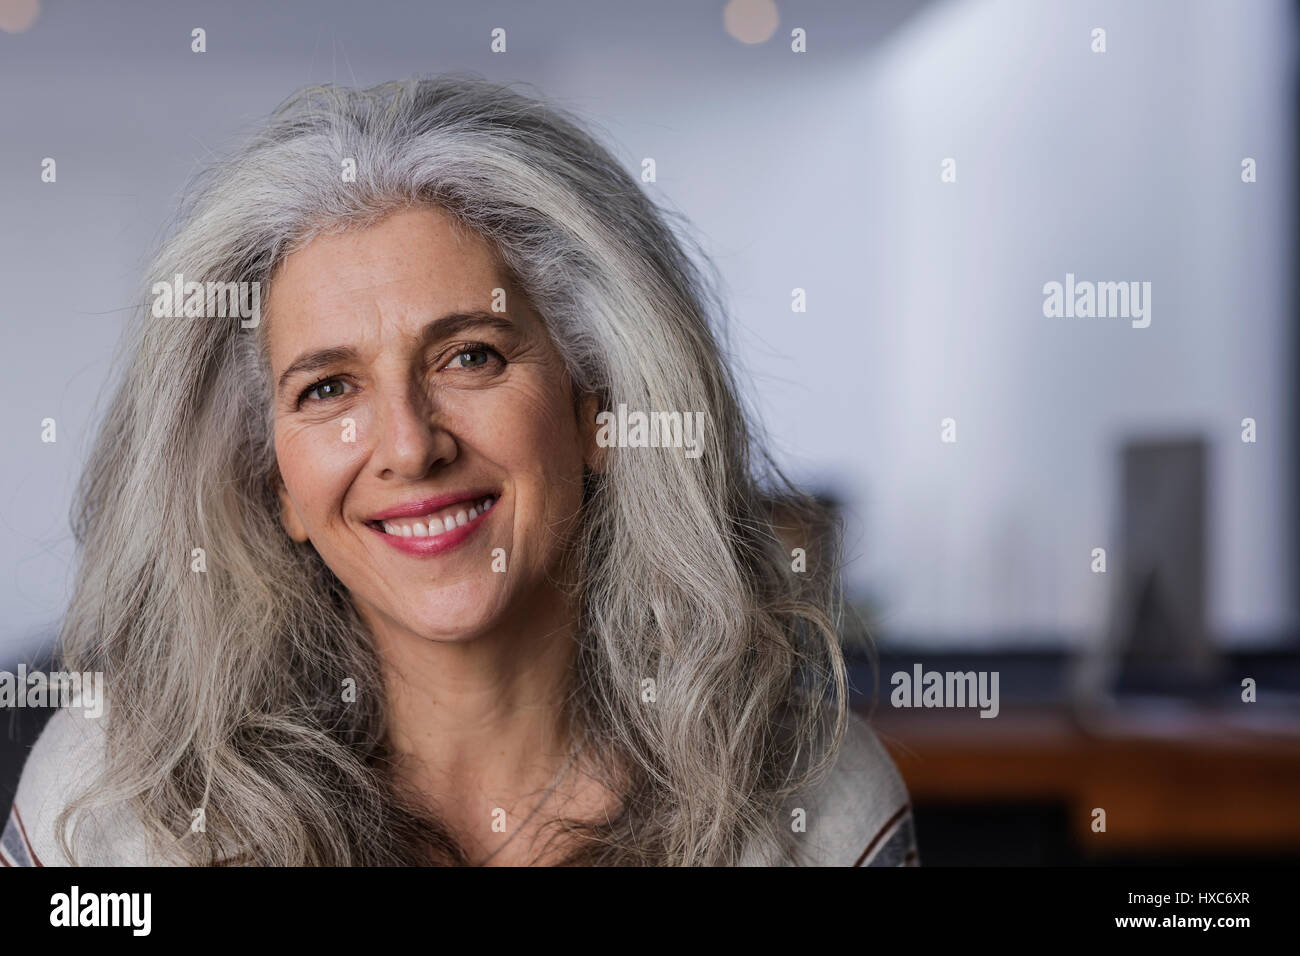 Portrait smiling mature woman with long, gray hair Stock Photo